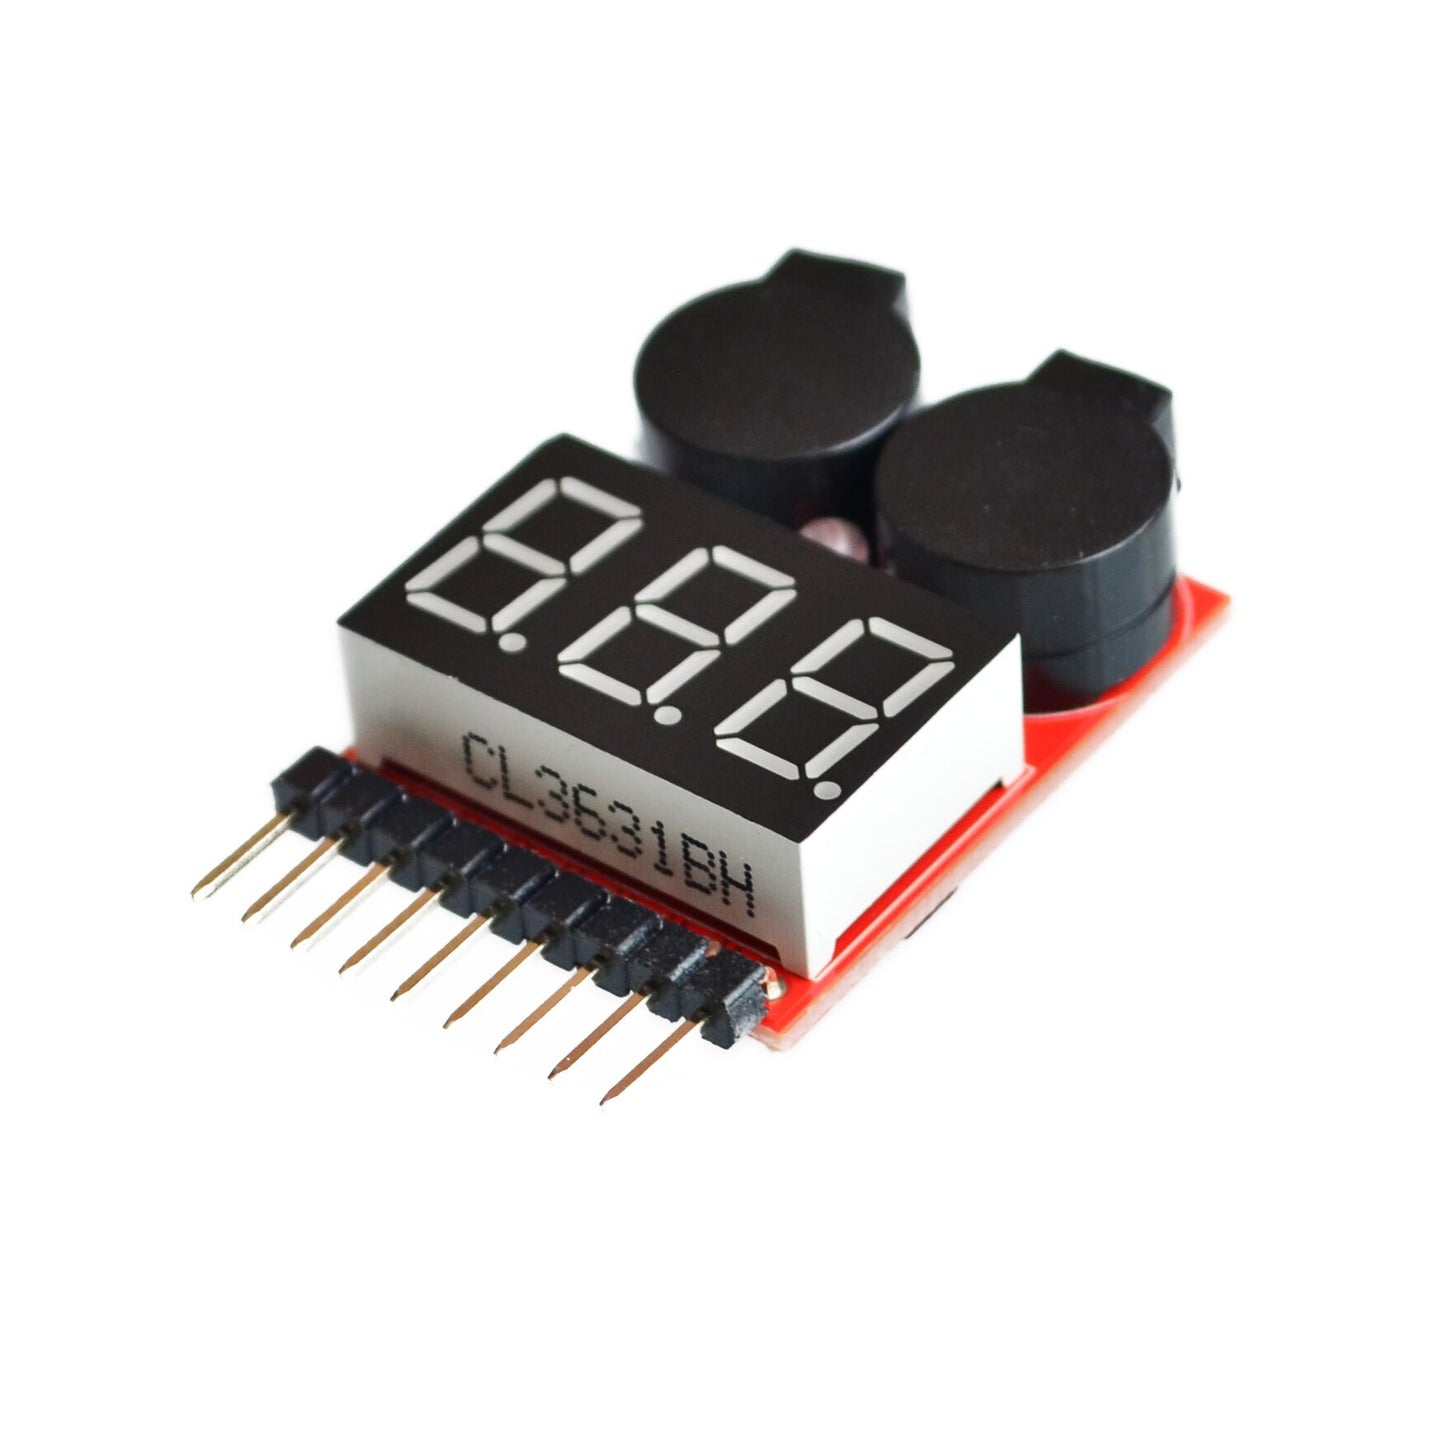 LiPo Battery Tester & Low Voltage Buzzer 1S to 8S